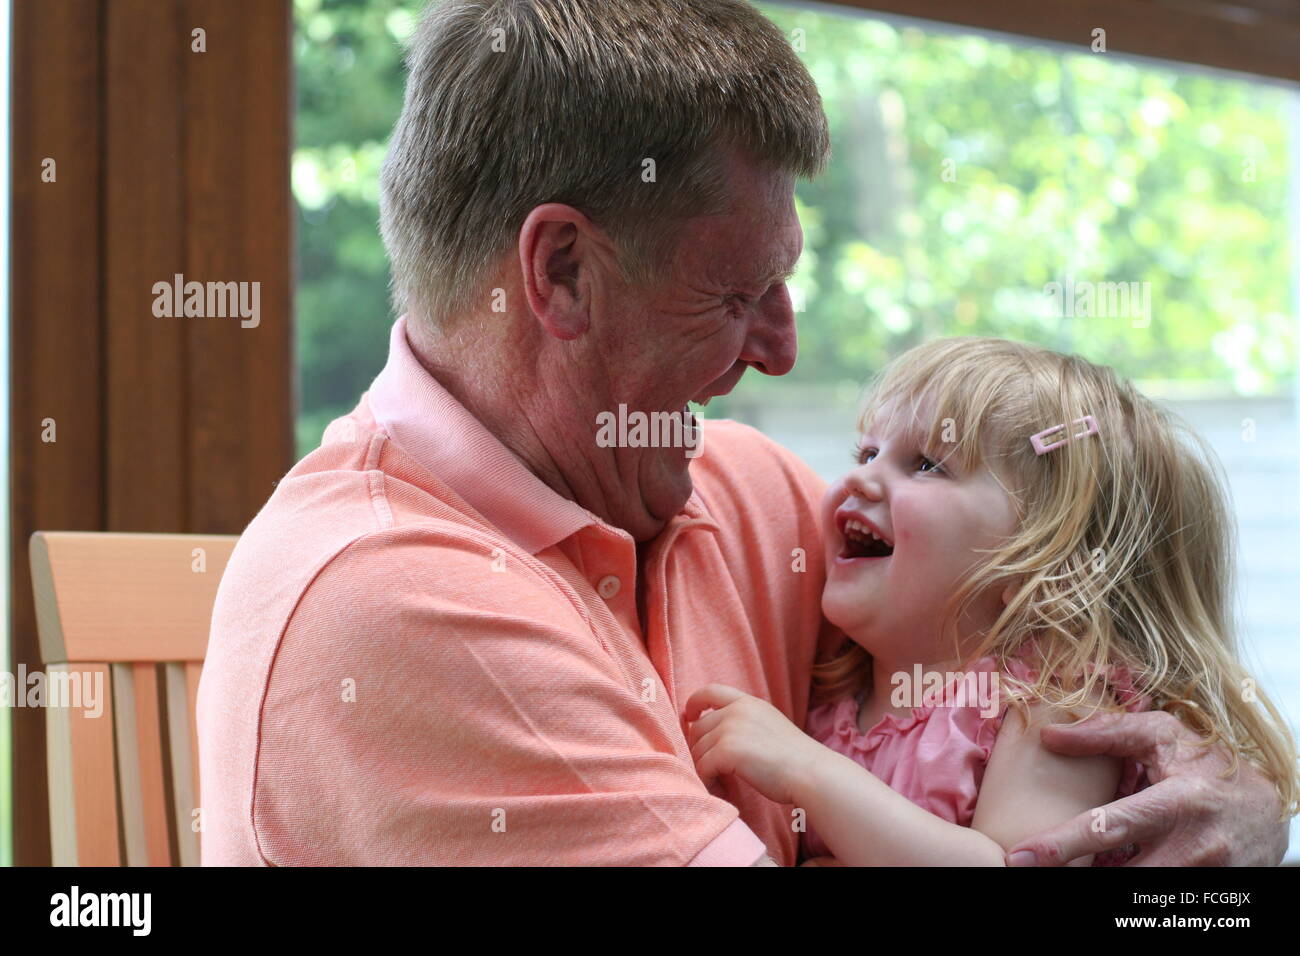 Grandad hugging his little grand-daughter, laughing together sharing a moment of joy and happiness Stock Photo